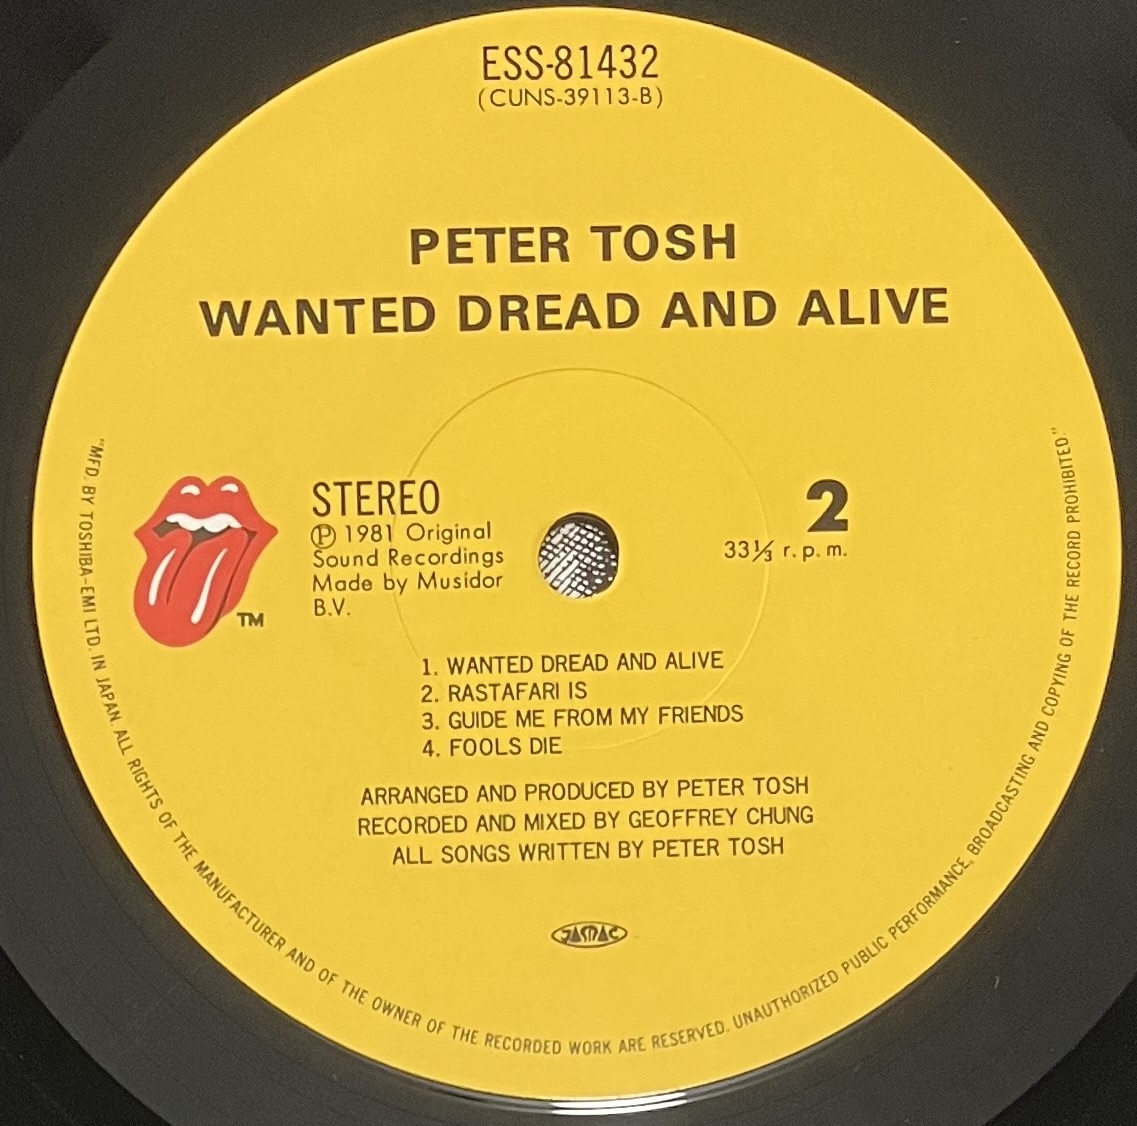 [ LP / レコード ] Peter Tosh / Wanted Dread & Alive ( Roots Reggae ) Rolling Stones Records - ESS-81432 ルーツ レゲエ_画像4